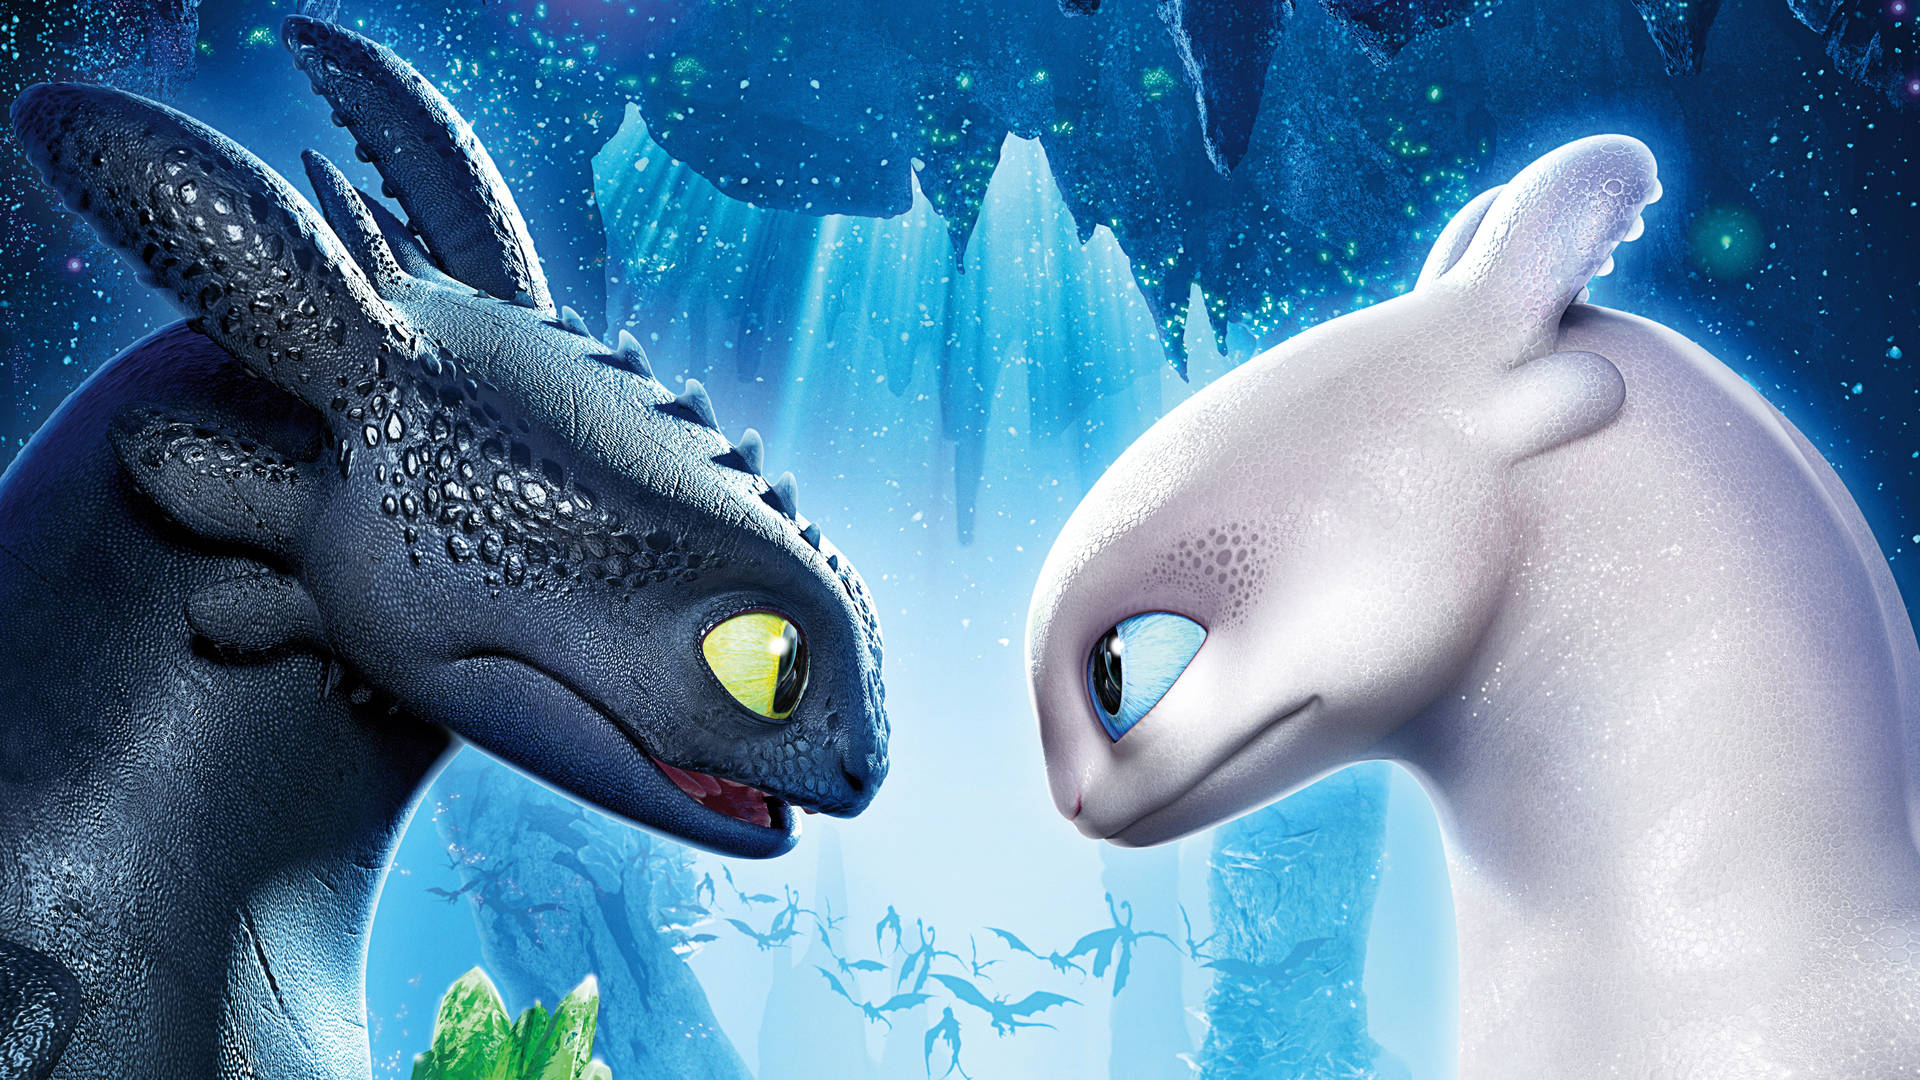 How To Train Your Dragon: The Hidden World Wallpaper